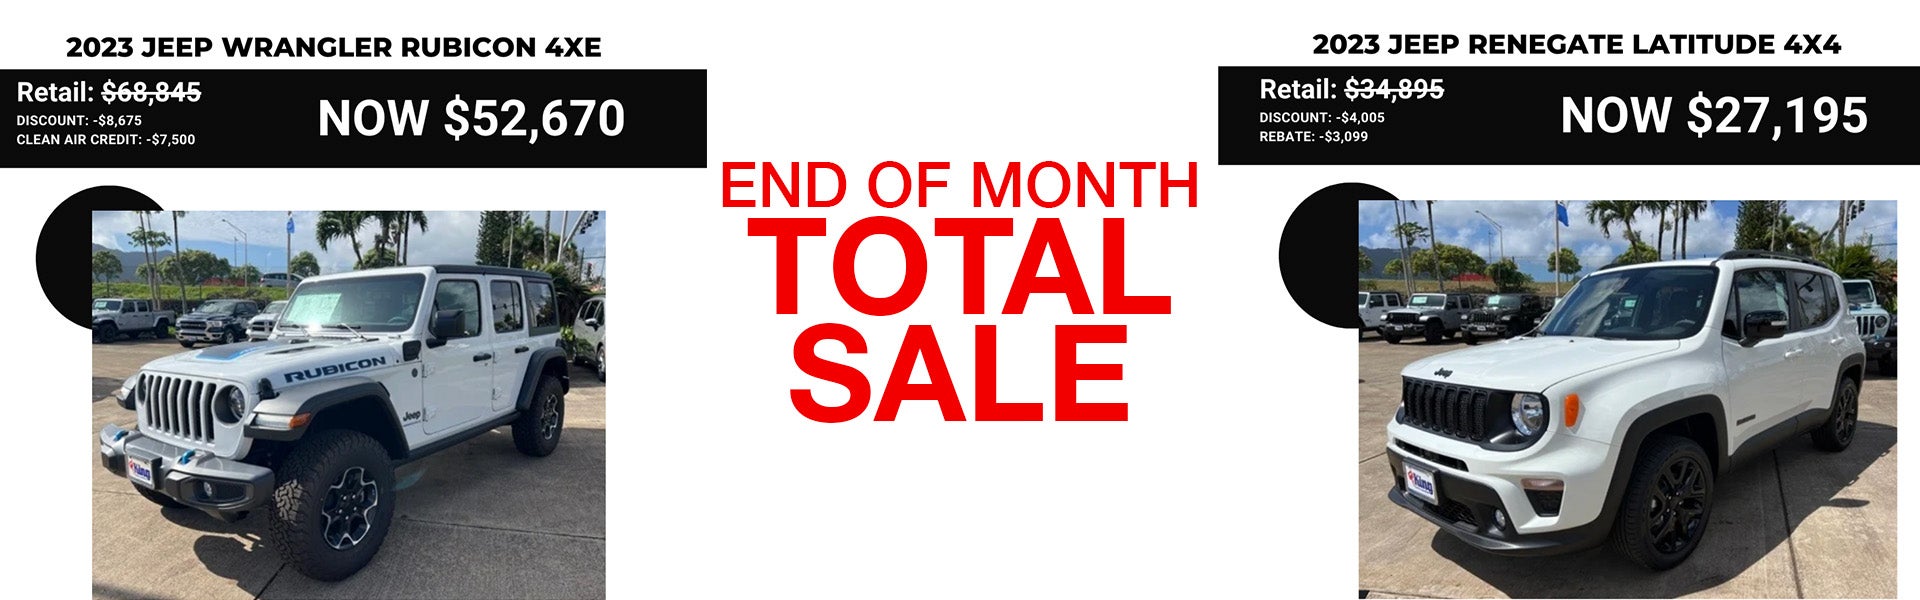 TOTAL SALE EVENT